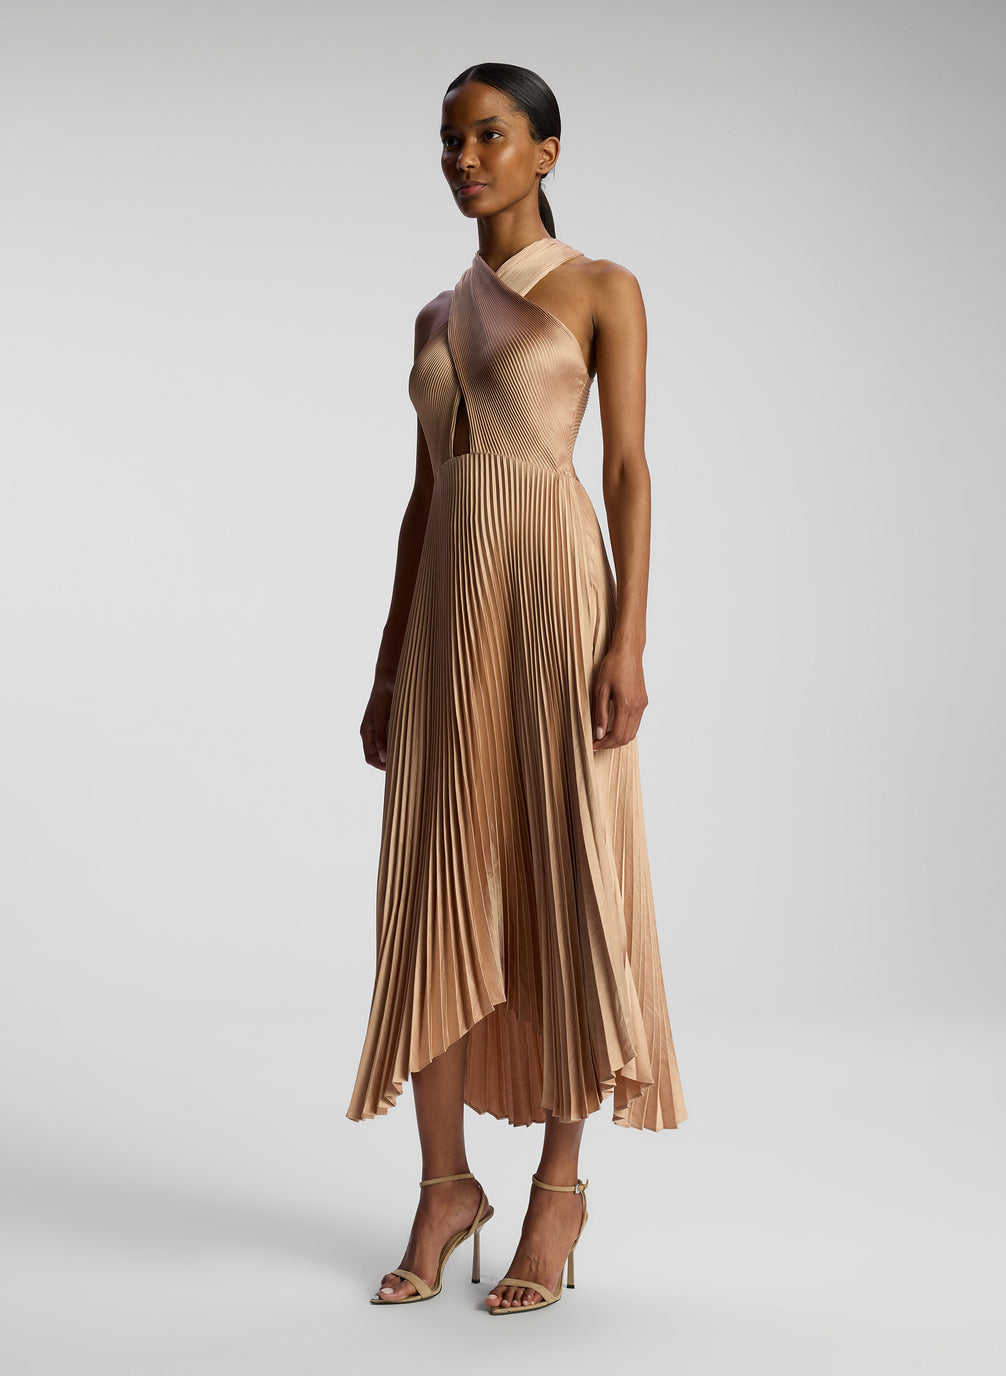 side view of woman wearing blush colored pleated midi dress